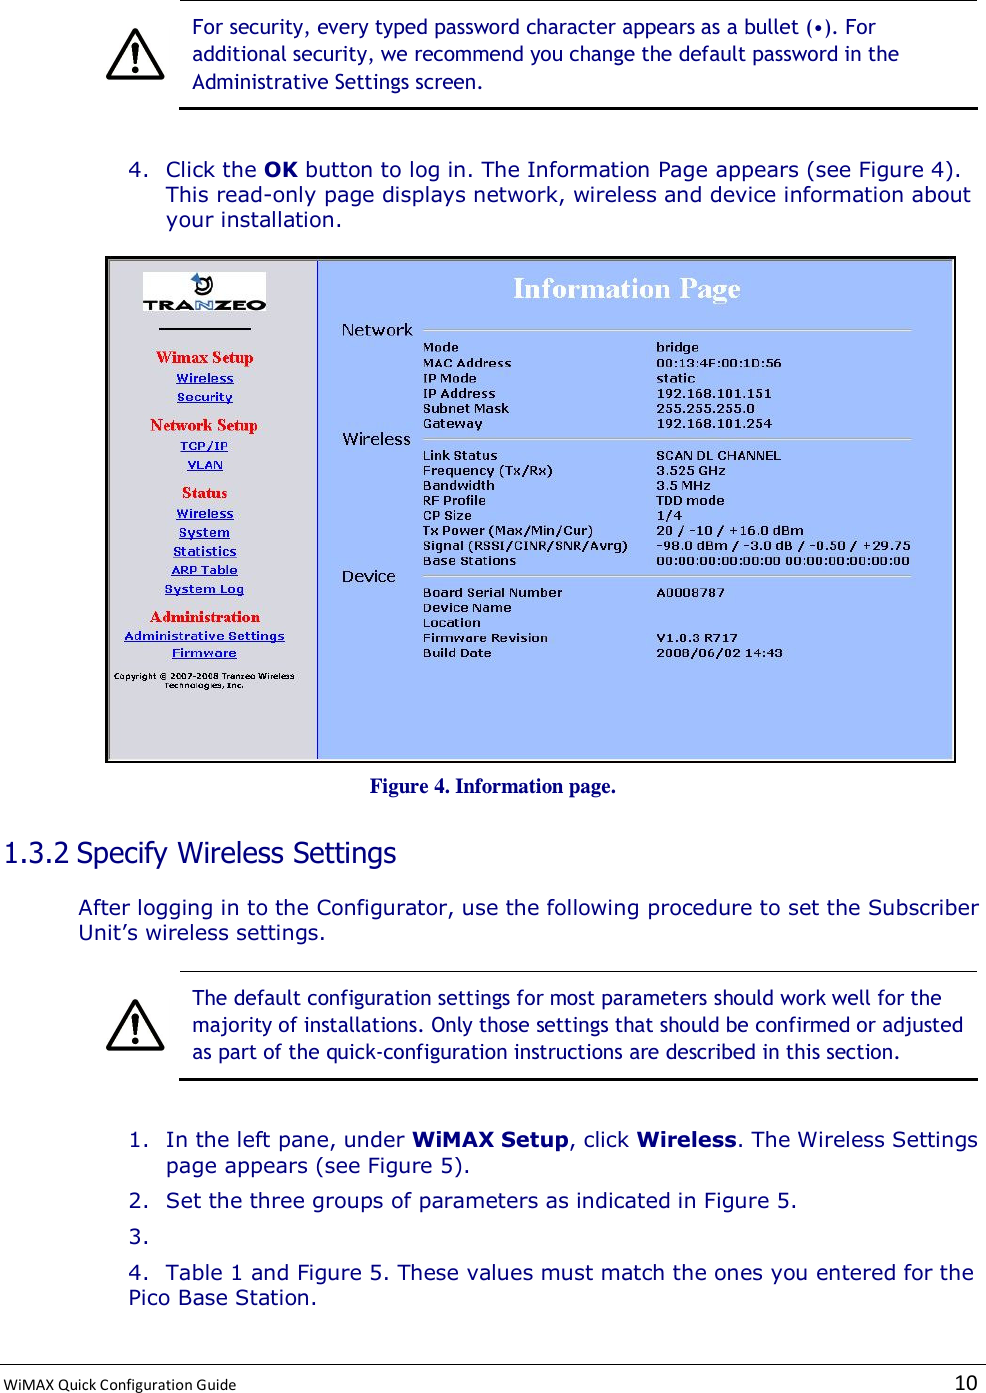  WiMAX Quick Configuration Guide   10     For security, every typed password character appears as a bullet (•). For additional security, we recommend you change the default password in the Administrative Settings screen.  4. Click the OK button to log in. The Information Page appears (see Figure 4). This read-only page displays network, wireless and device information about your installation.  Figure 4. Information page. 1.3.2 Specify Wireless Settings After logging in to the Configurator, use the following procedure to set the Subscriber Unit’s wireless settings.   The default configuration settings for most parameters should work well for the majority of installations. Only those settings that should be confirmed or adjusted as part of the quick-configuration instructions are described in this section.  1. In the left pane, under WiMAX Setup, click Wireless. The Wireless Settings page appears (see Figure 5). 2. Set the three groups of parameters as indicated in Figure 5. 3.  4. Table 1 and Figure 5. These values must match the ones you entered for the Pico Base Station. 